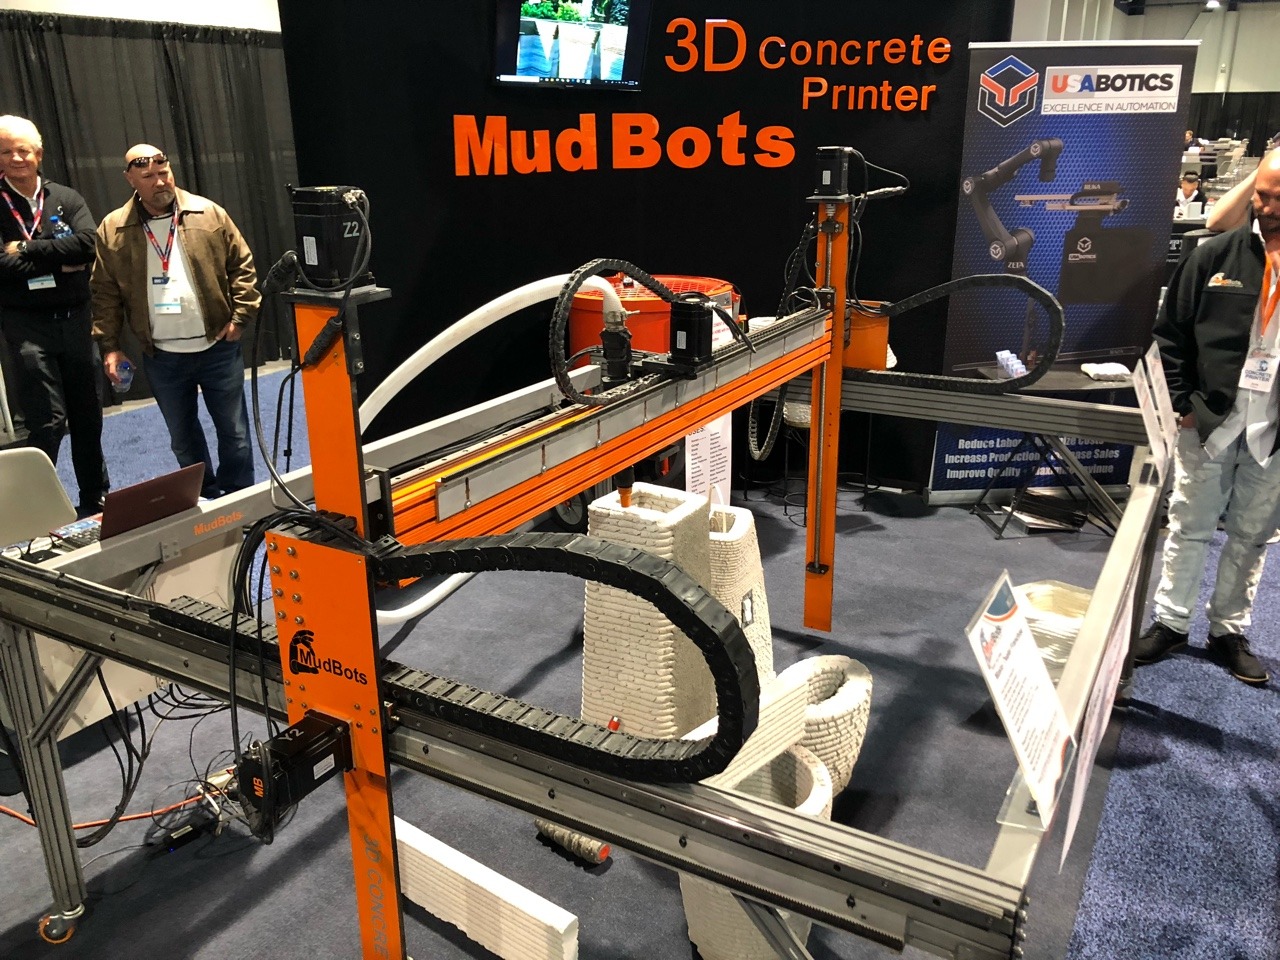 The company, MudBots 3D Concrete Printing, prints houses, bridges, pillars, statues, “fences,” water features, signage, and planters. The future is here.